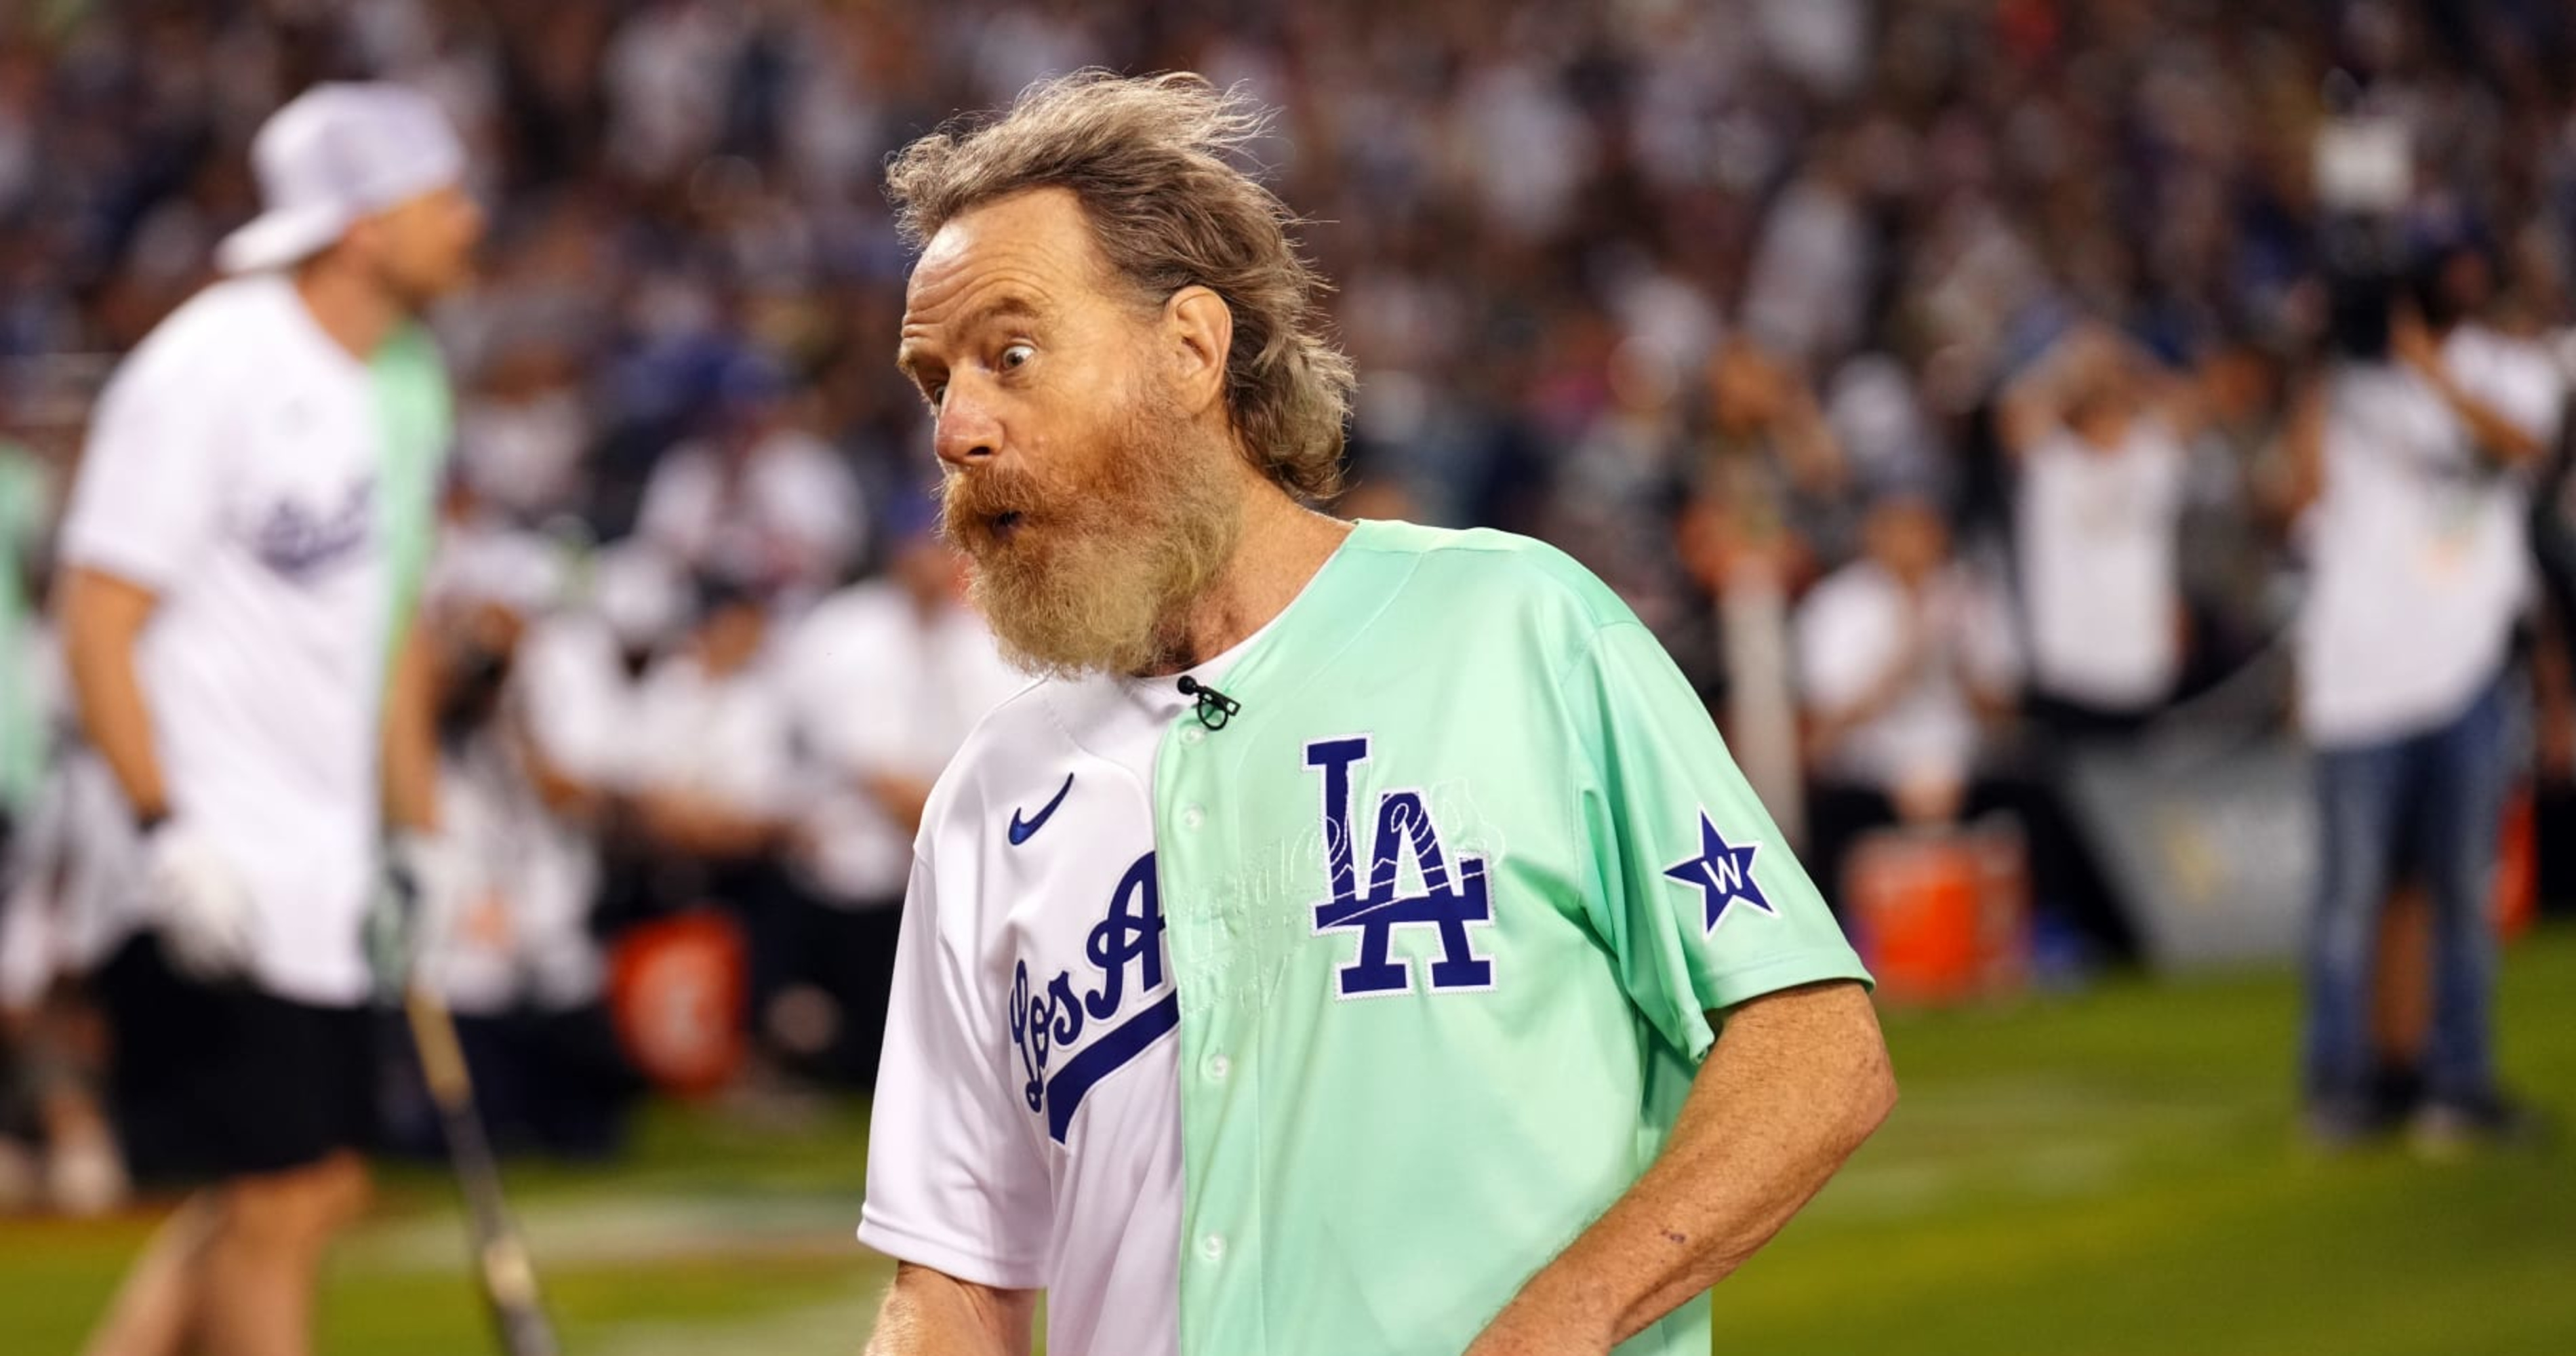 2022 All-Star Celebrity Softball Game Los Angeles Dodgers Bad